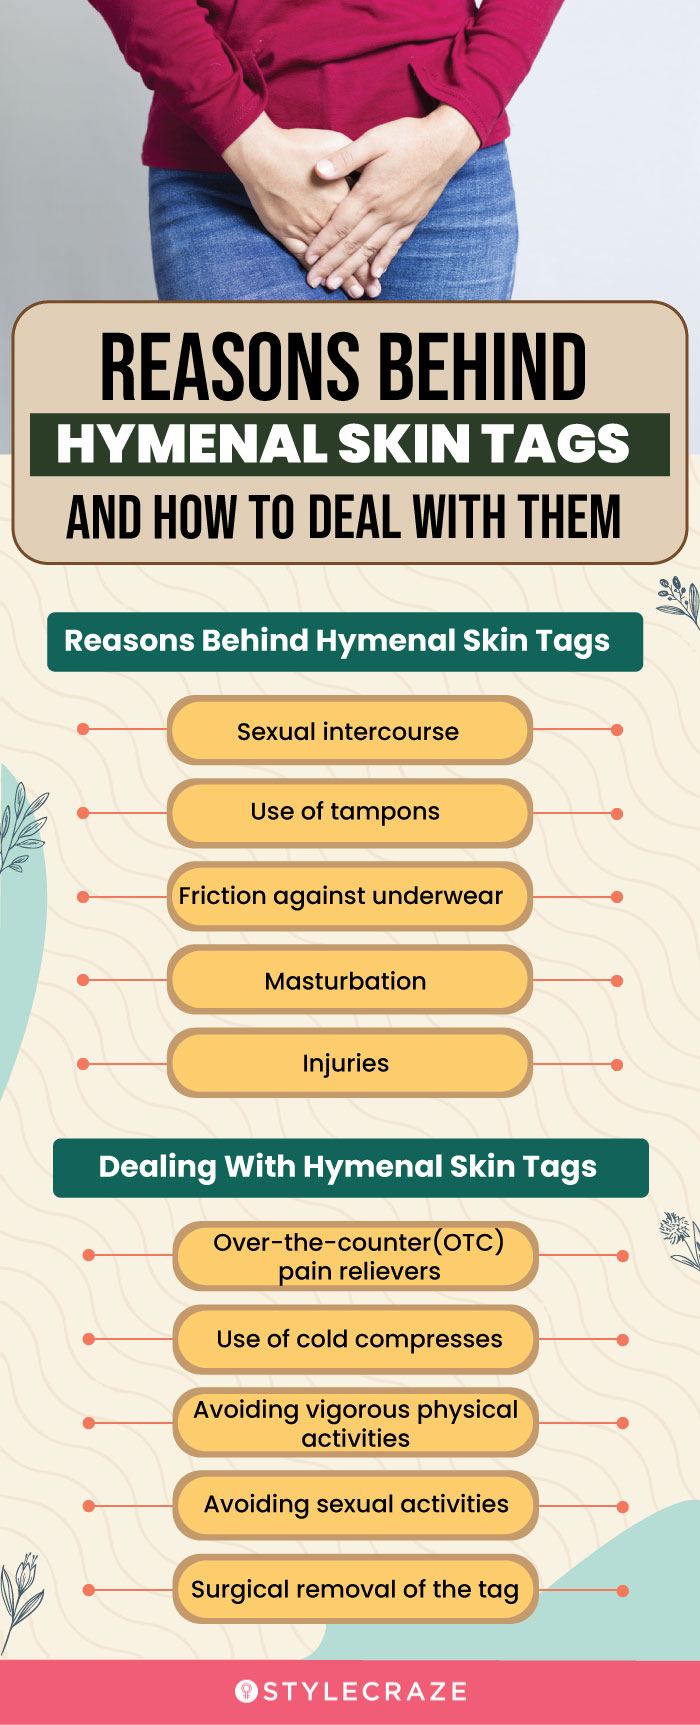 reasons behind hymenal skin tags and how to deal with them (infographic)